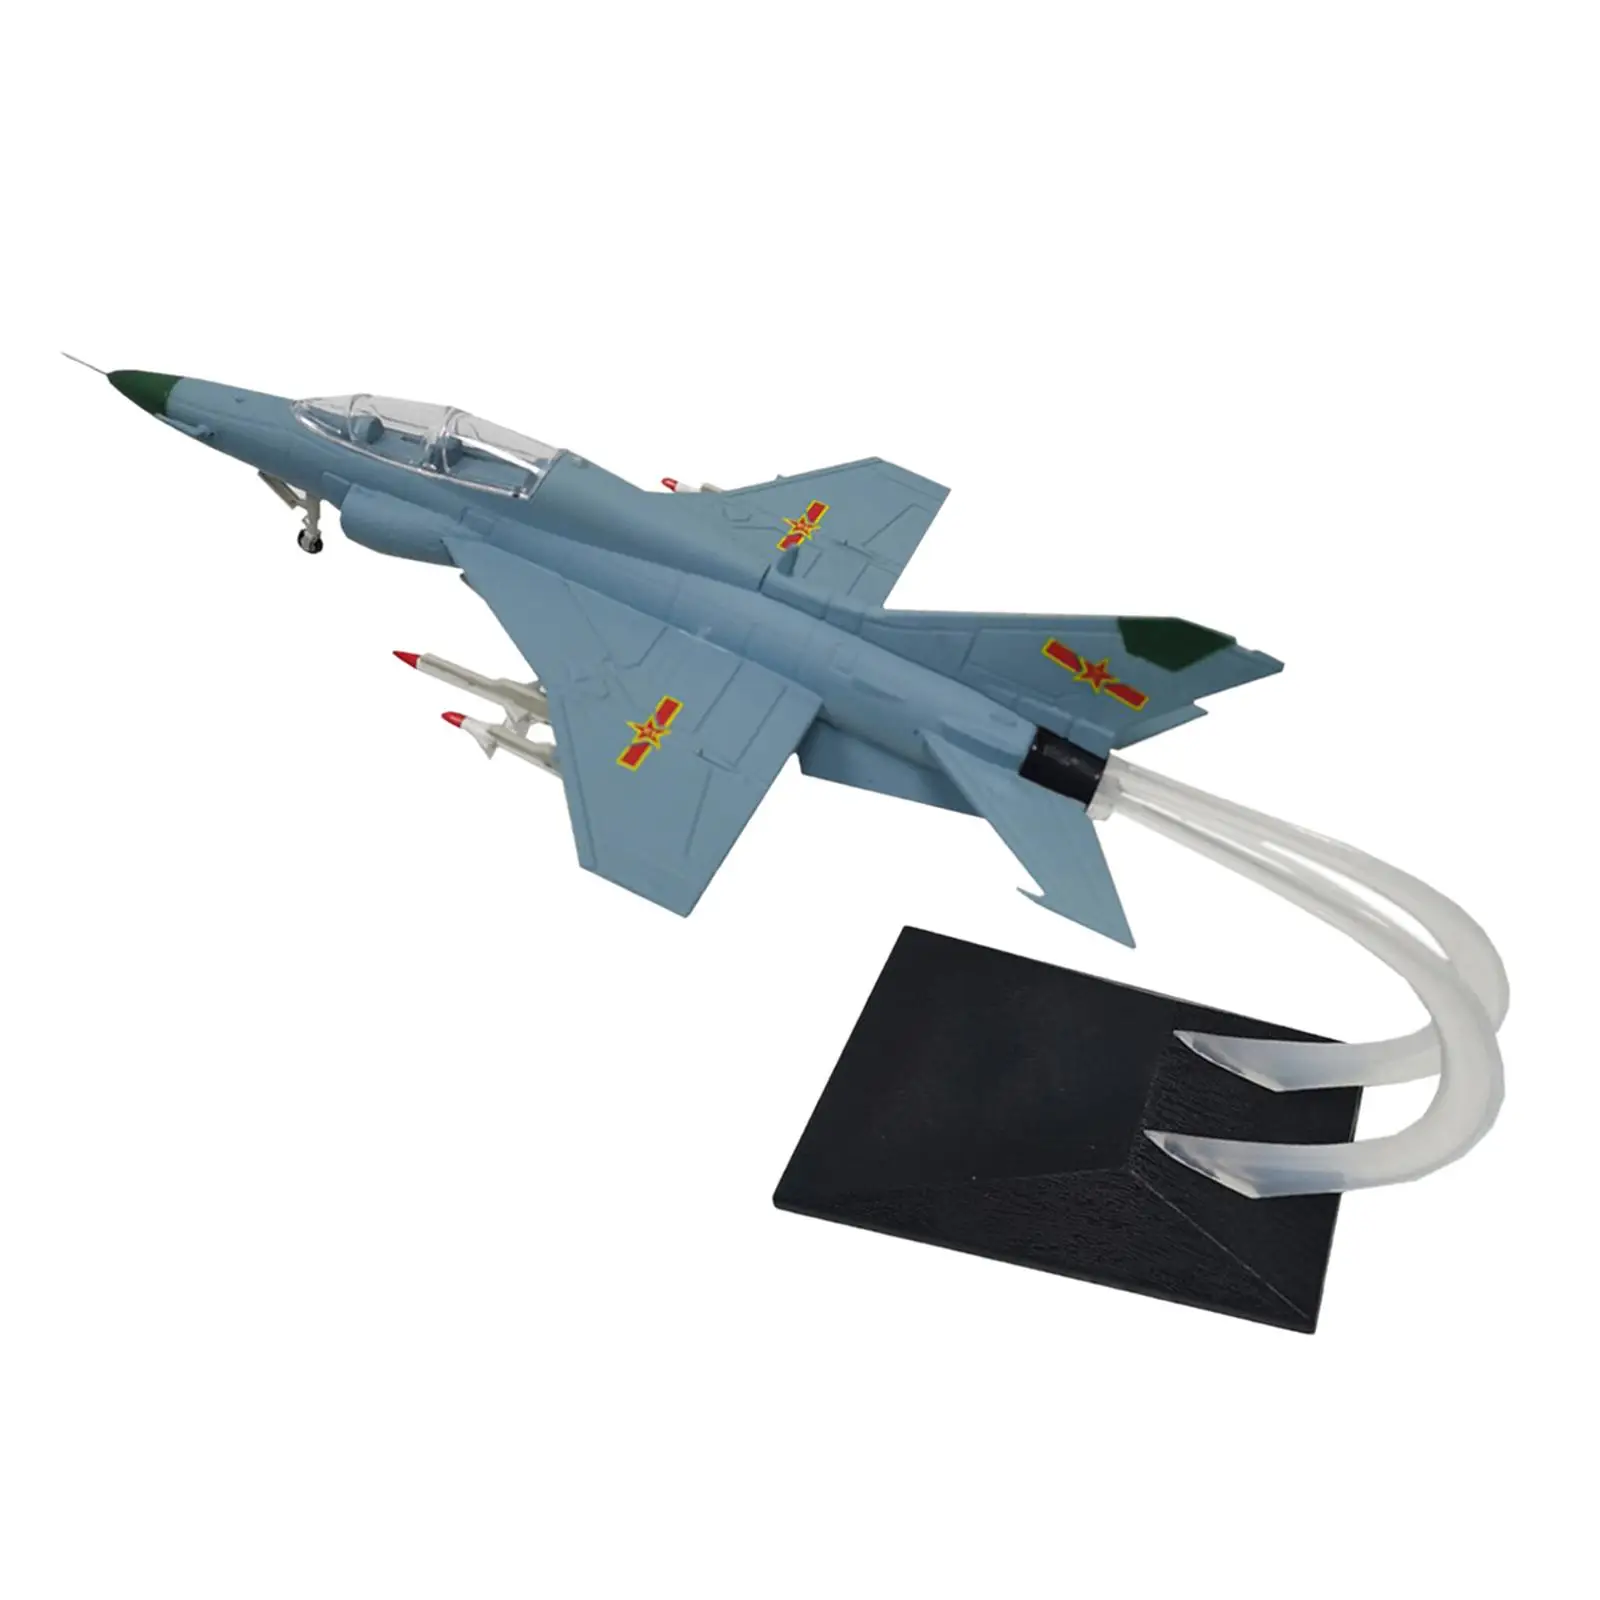 Alloy Metal Aircraft Toy Souvenir Fighter Model 1/48 Scale Diecast Model Planes for Bookshelf Office Countertop Cabinet Bedroom